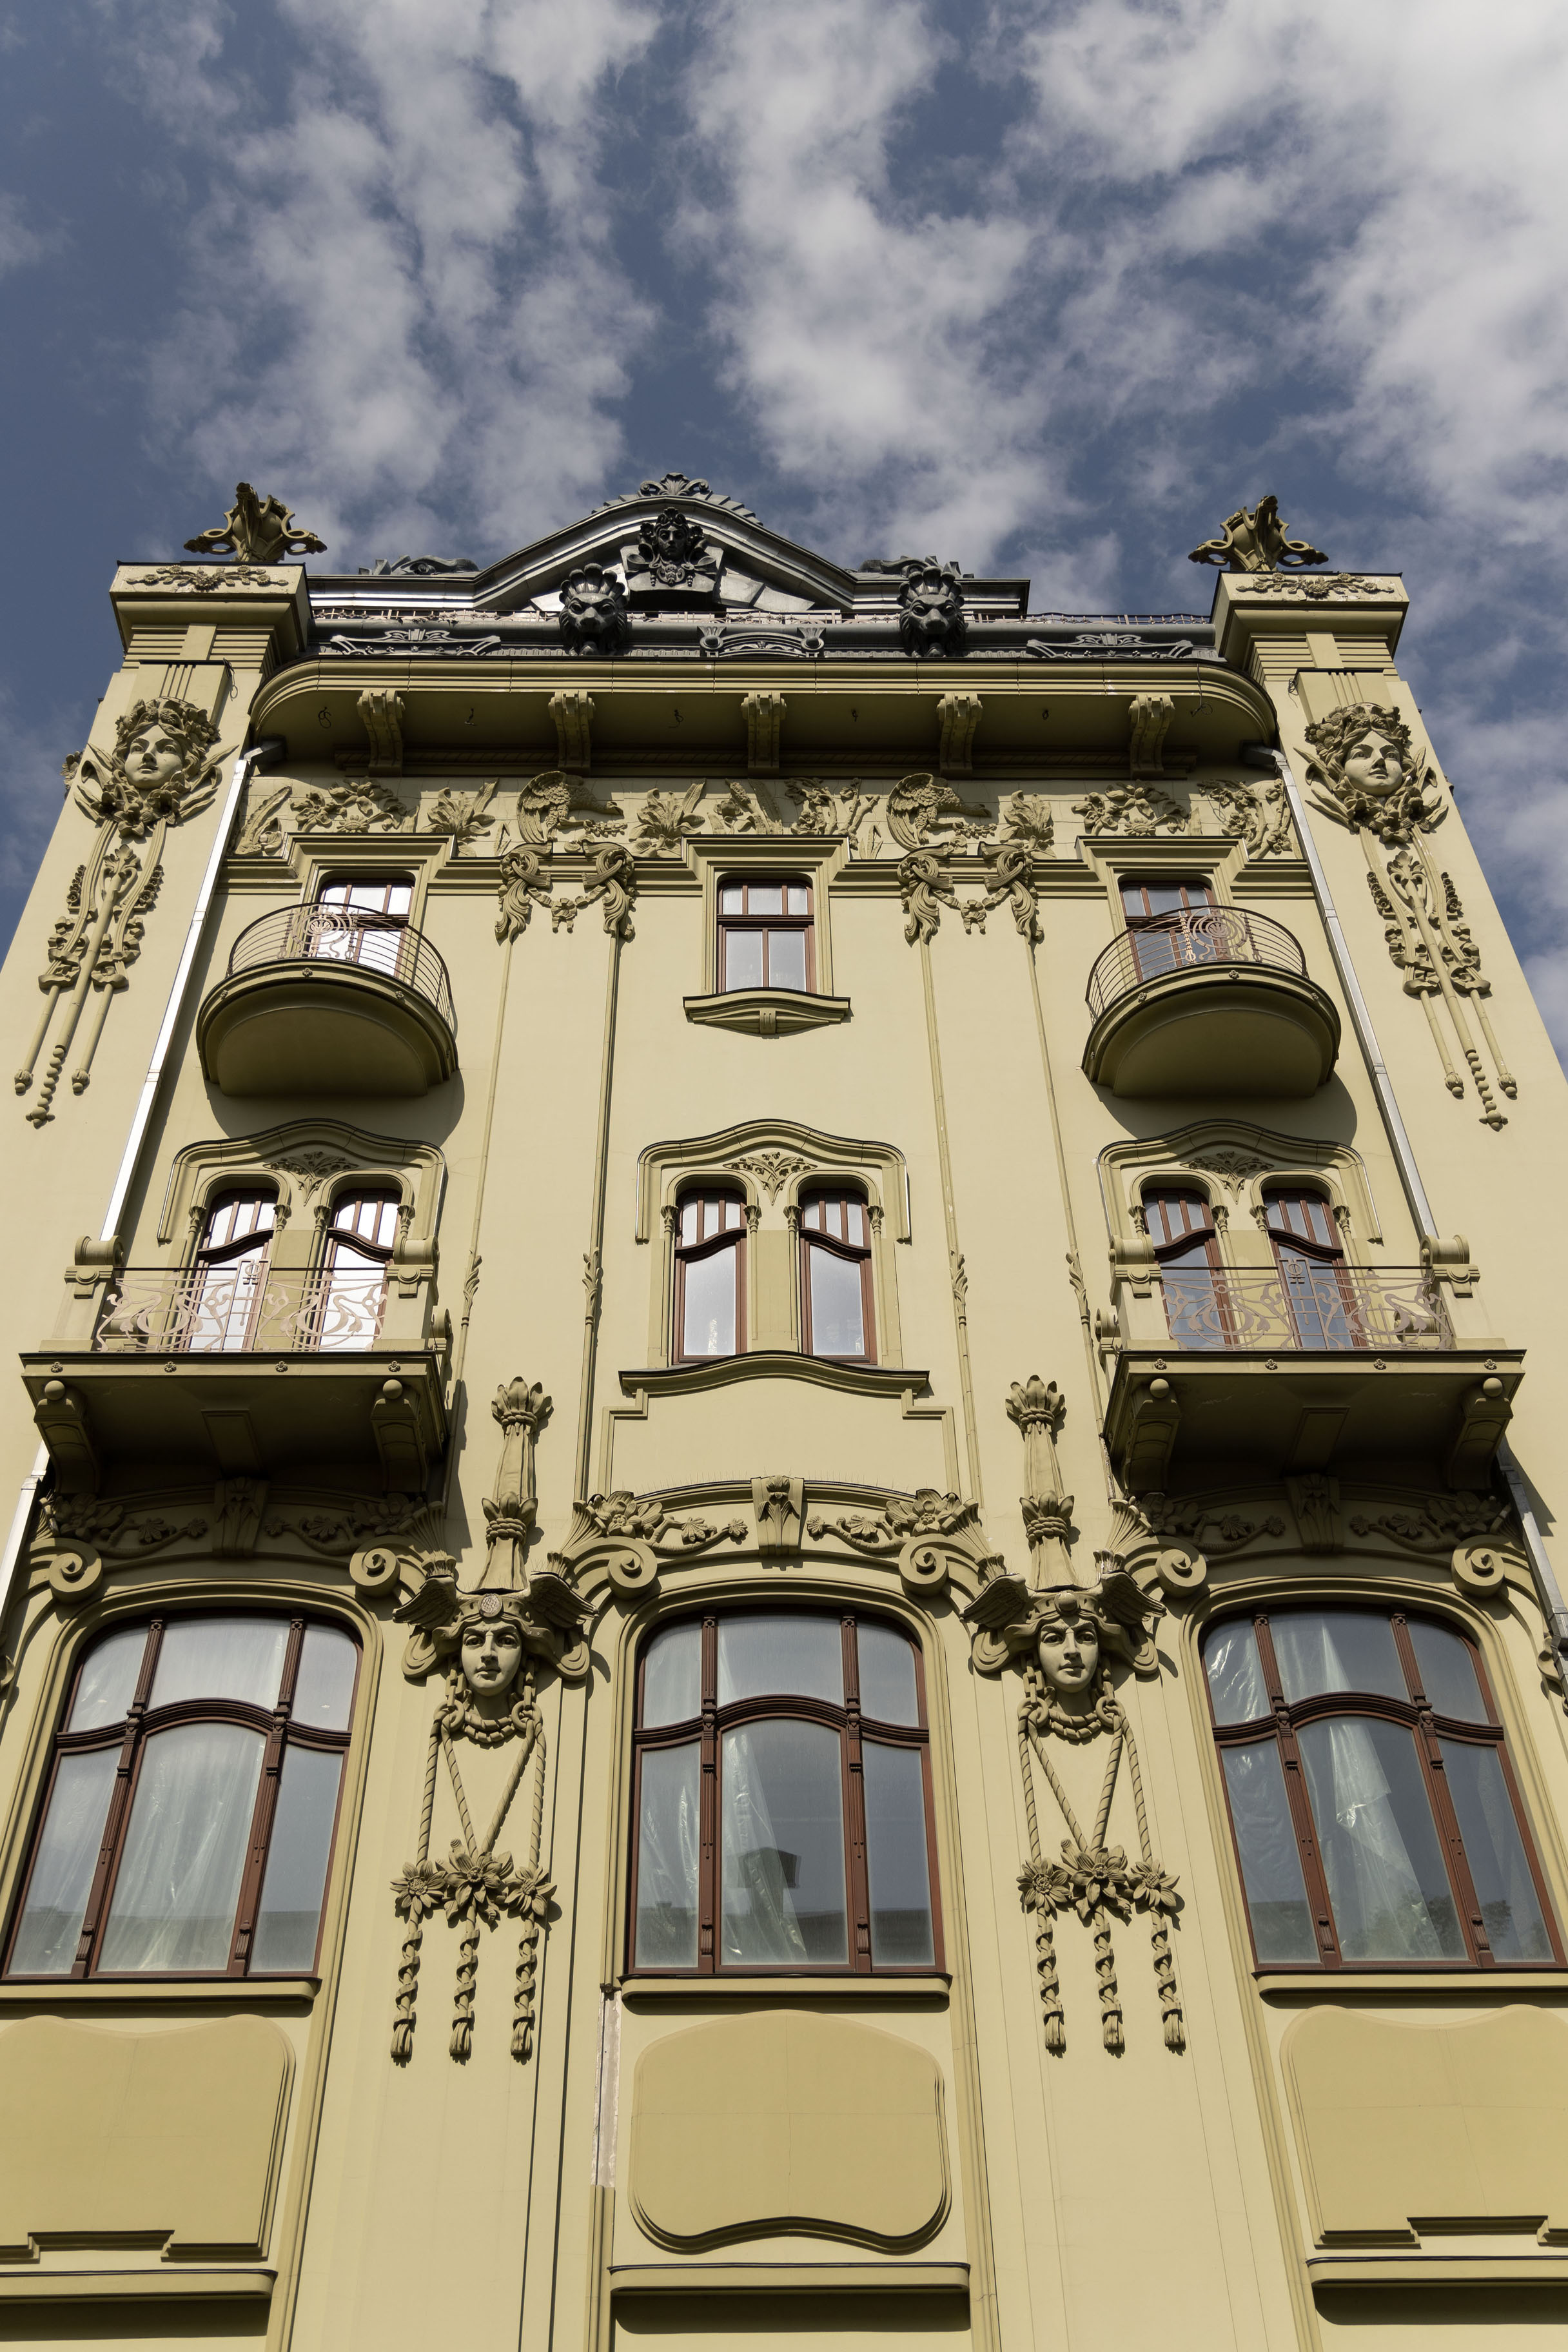 Looking up one of the many elegant buildings in Odesa | Odesa impressions | Ukraine